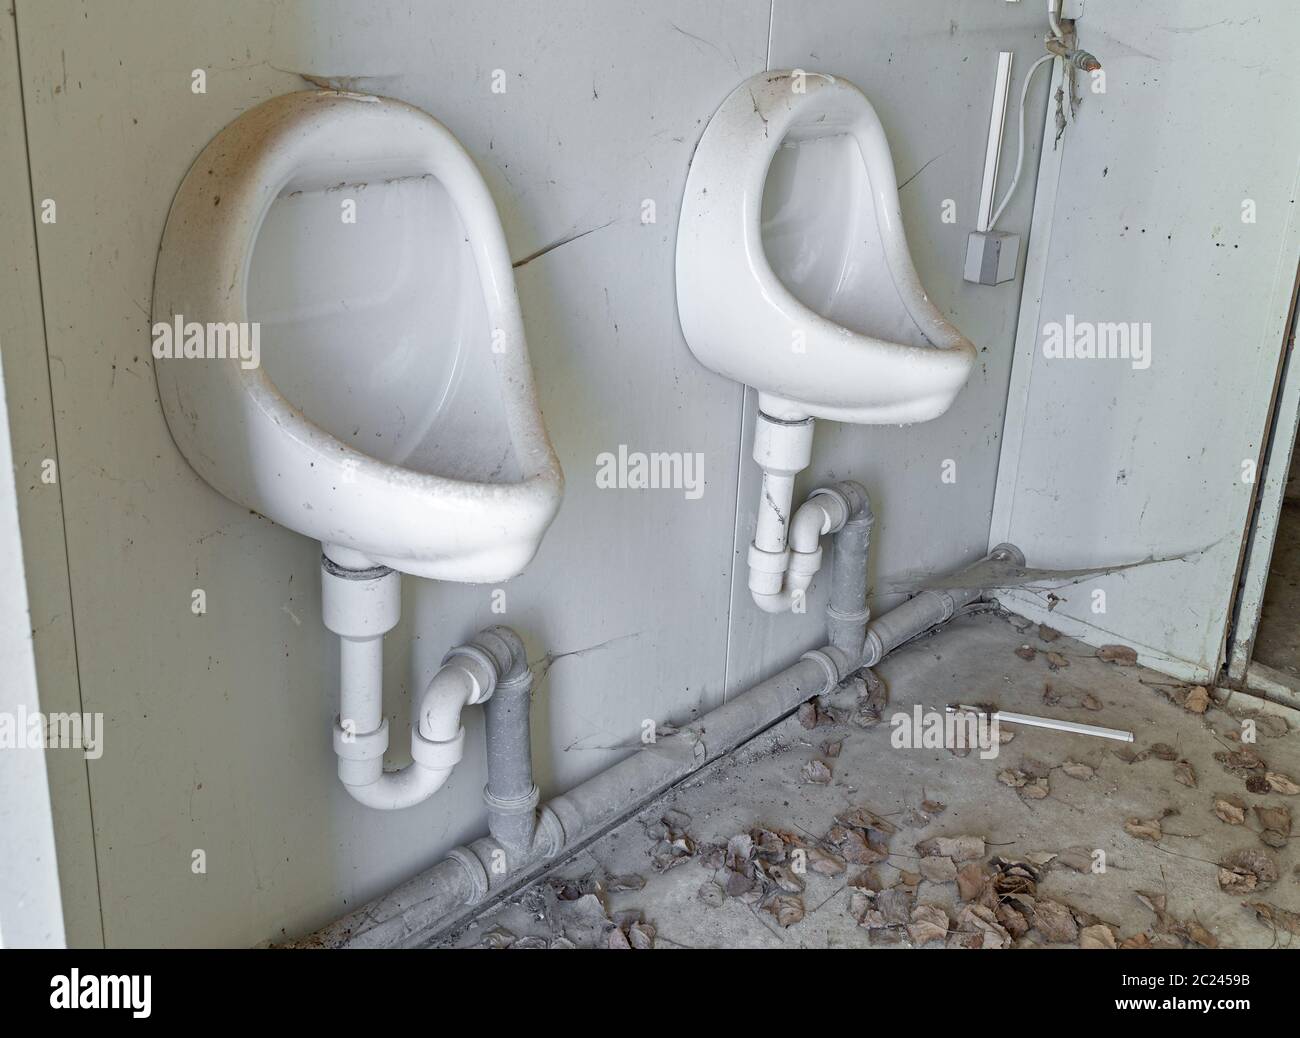 Looking into a scrapped toilet cart Stock Photo